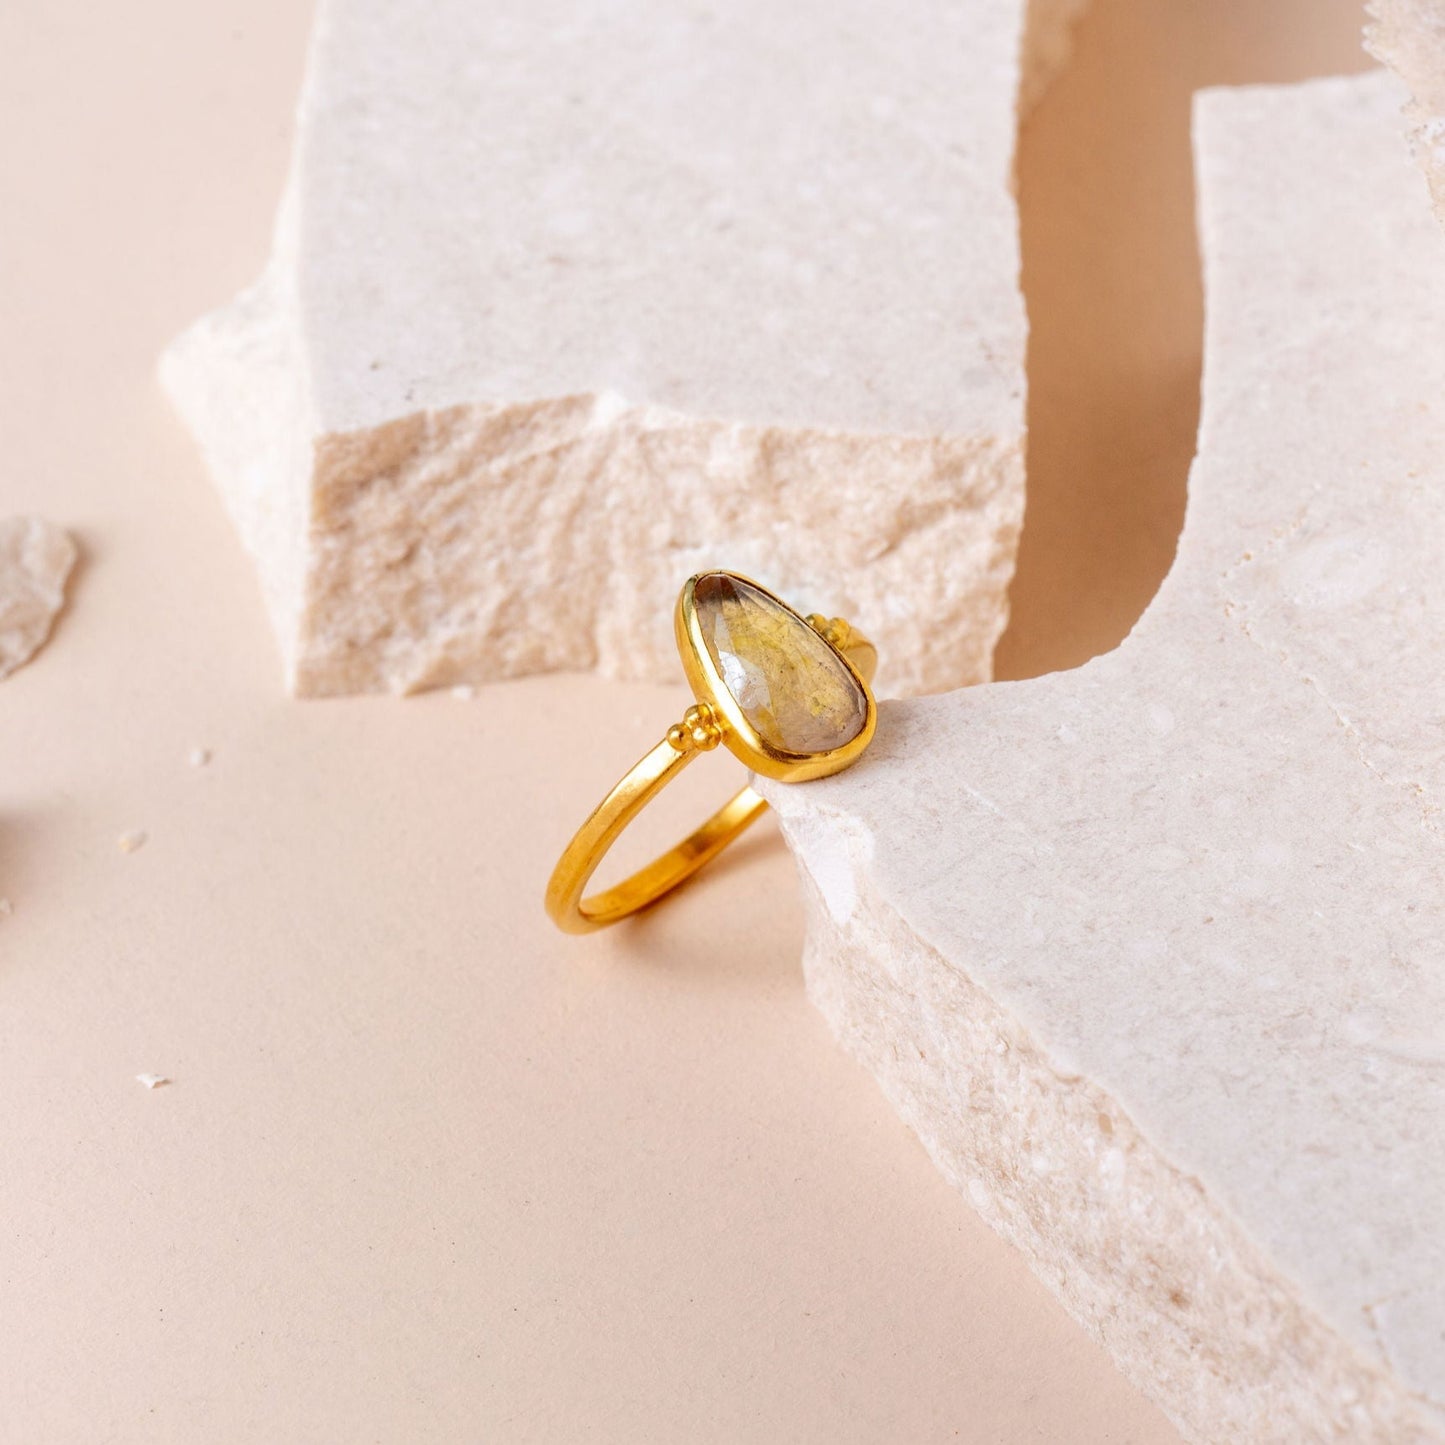 Handmade gold ring showcasing a delicate teardrop-shaped yellow sapphire and exquisite granulation work.